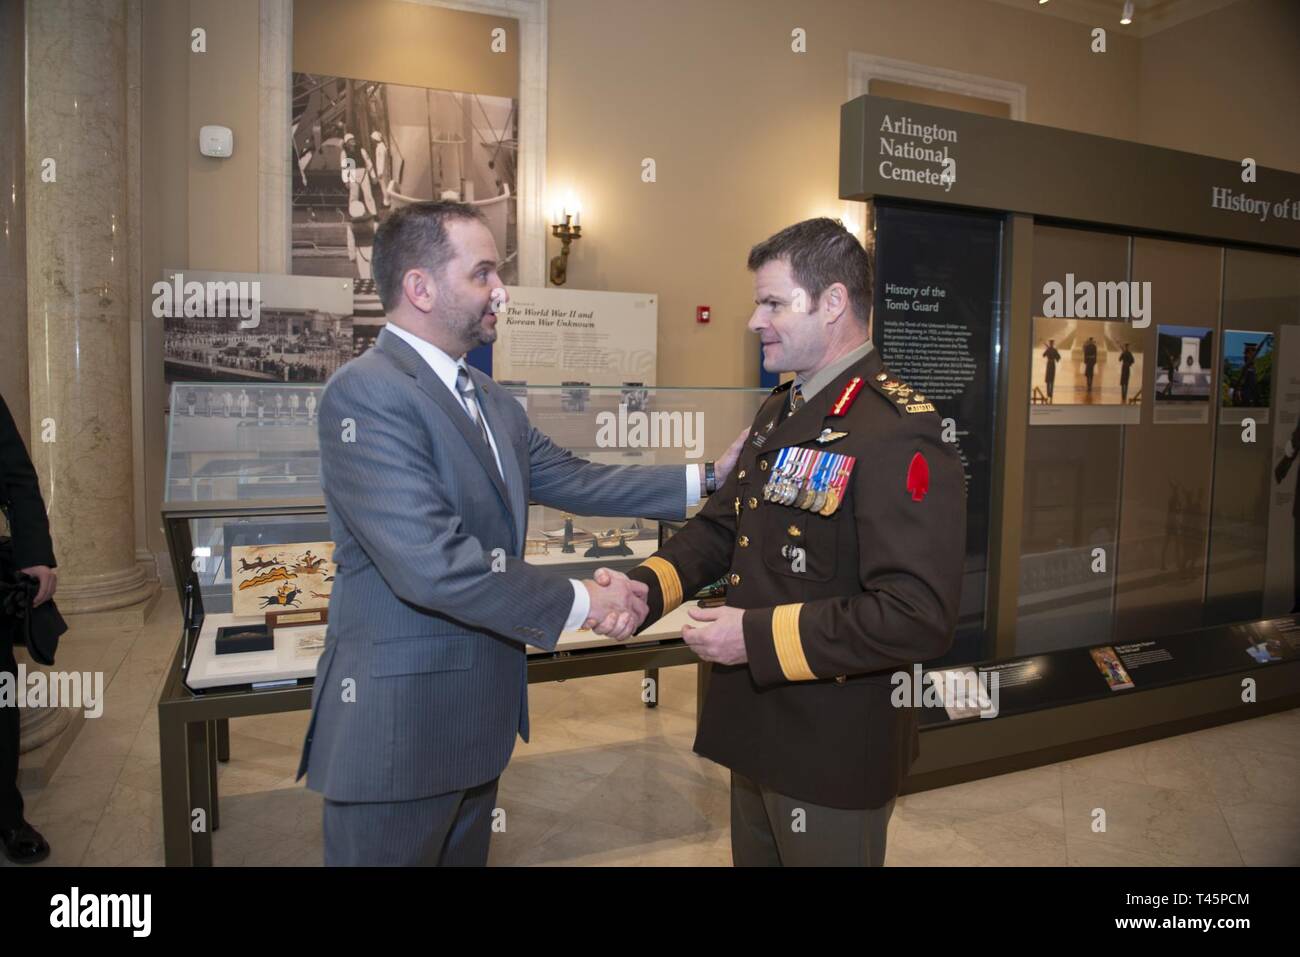 Michael Migliara (left), director of operations, Arlington National Cemetery; presents Lt. Gen. M.N. (Mike) Rouleau (right), commander, Canadian Joint Operations Command; with a coin in the Memorial Amphitheater Display Room at Arlington National Cemetery, Arlington, Virginia, March 6, 2019. While at the cemetery, Rouleau participated in a Public Wreath-Laying Ceremony at the Tomb of the Unknown Soldier and observed the Changing of the Guard. Stock Photo